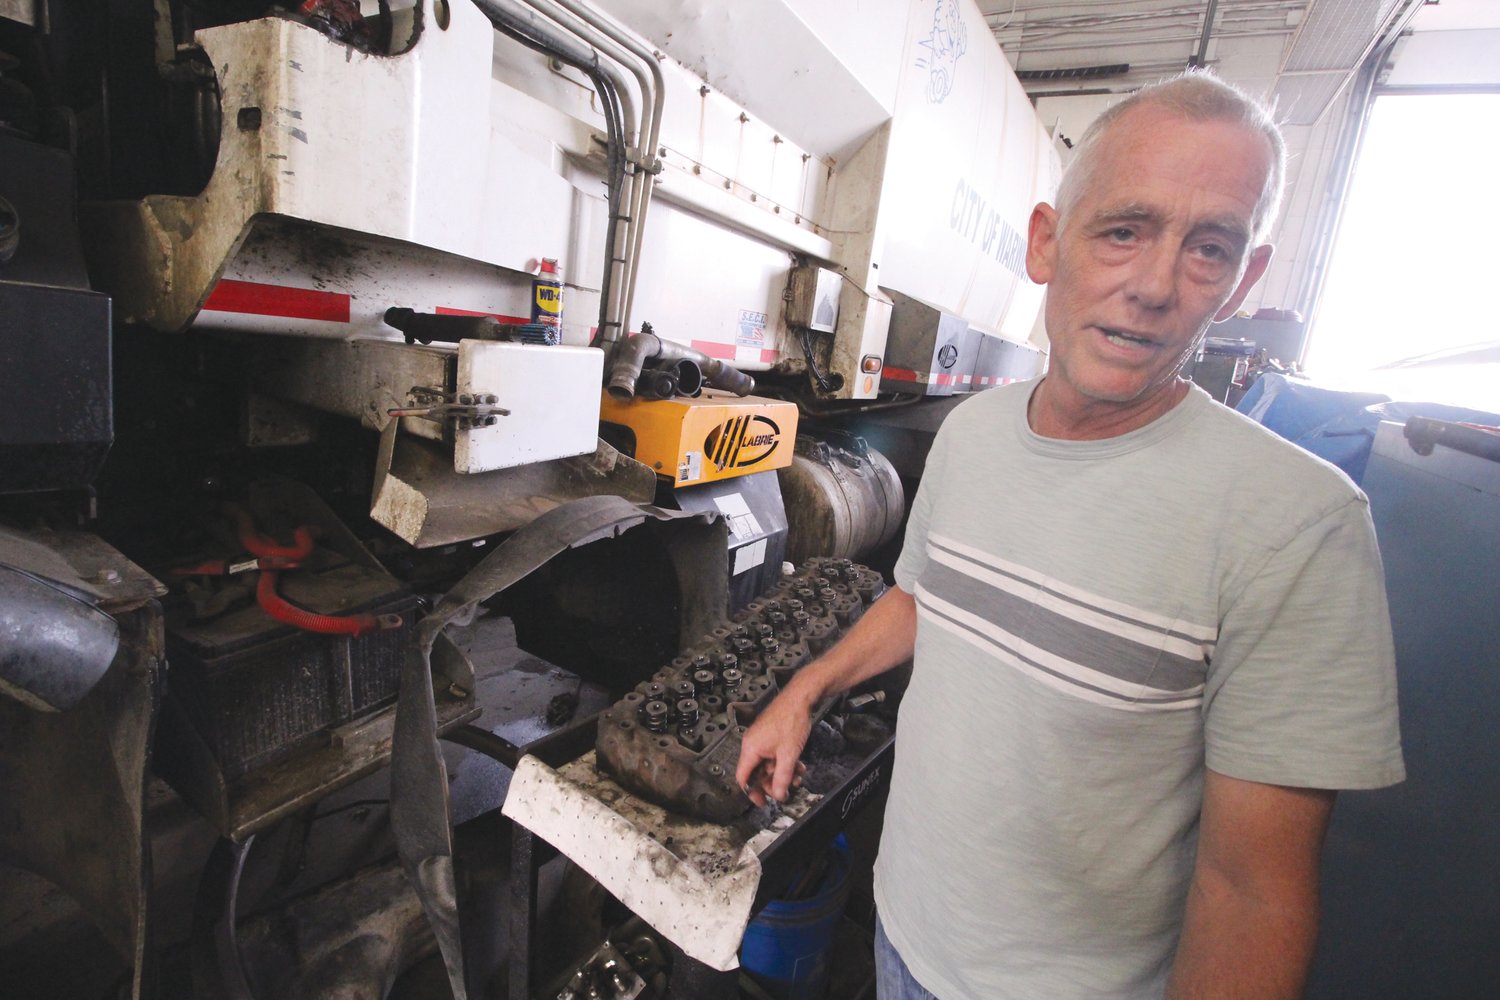 IN NEED OF AN ENGINE: James Vangyzen beside one of the sanitation trucks that is currently out of commission and in the city garage. City mechanics are rebuilding the engine, estimated to cost $8,000 in parts. A rebuilt engine off the shelf would cost about $30,000.